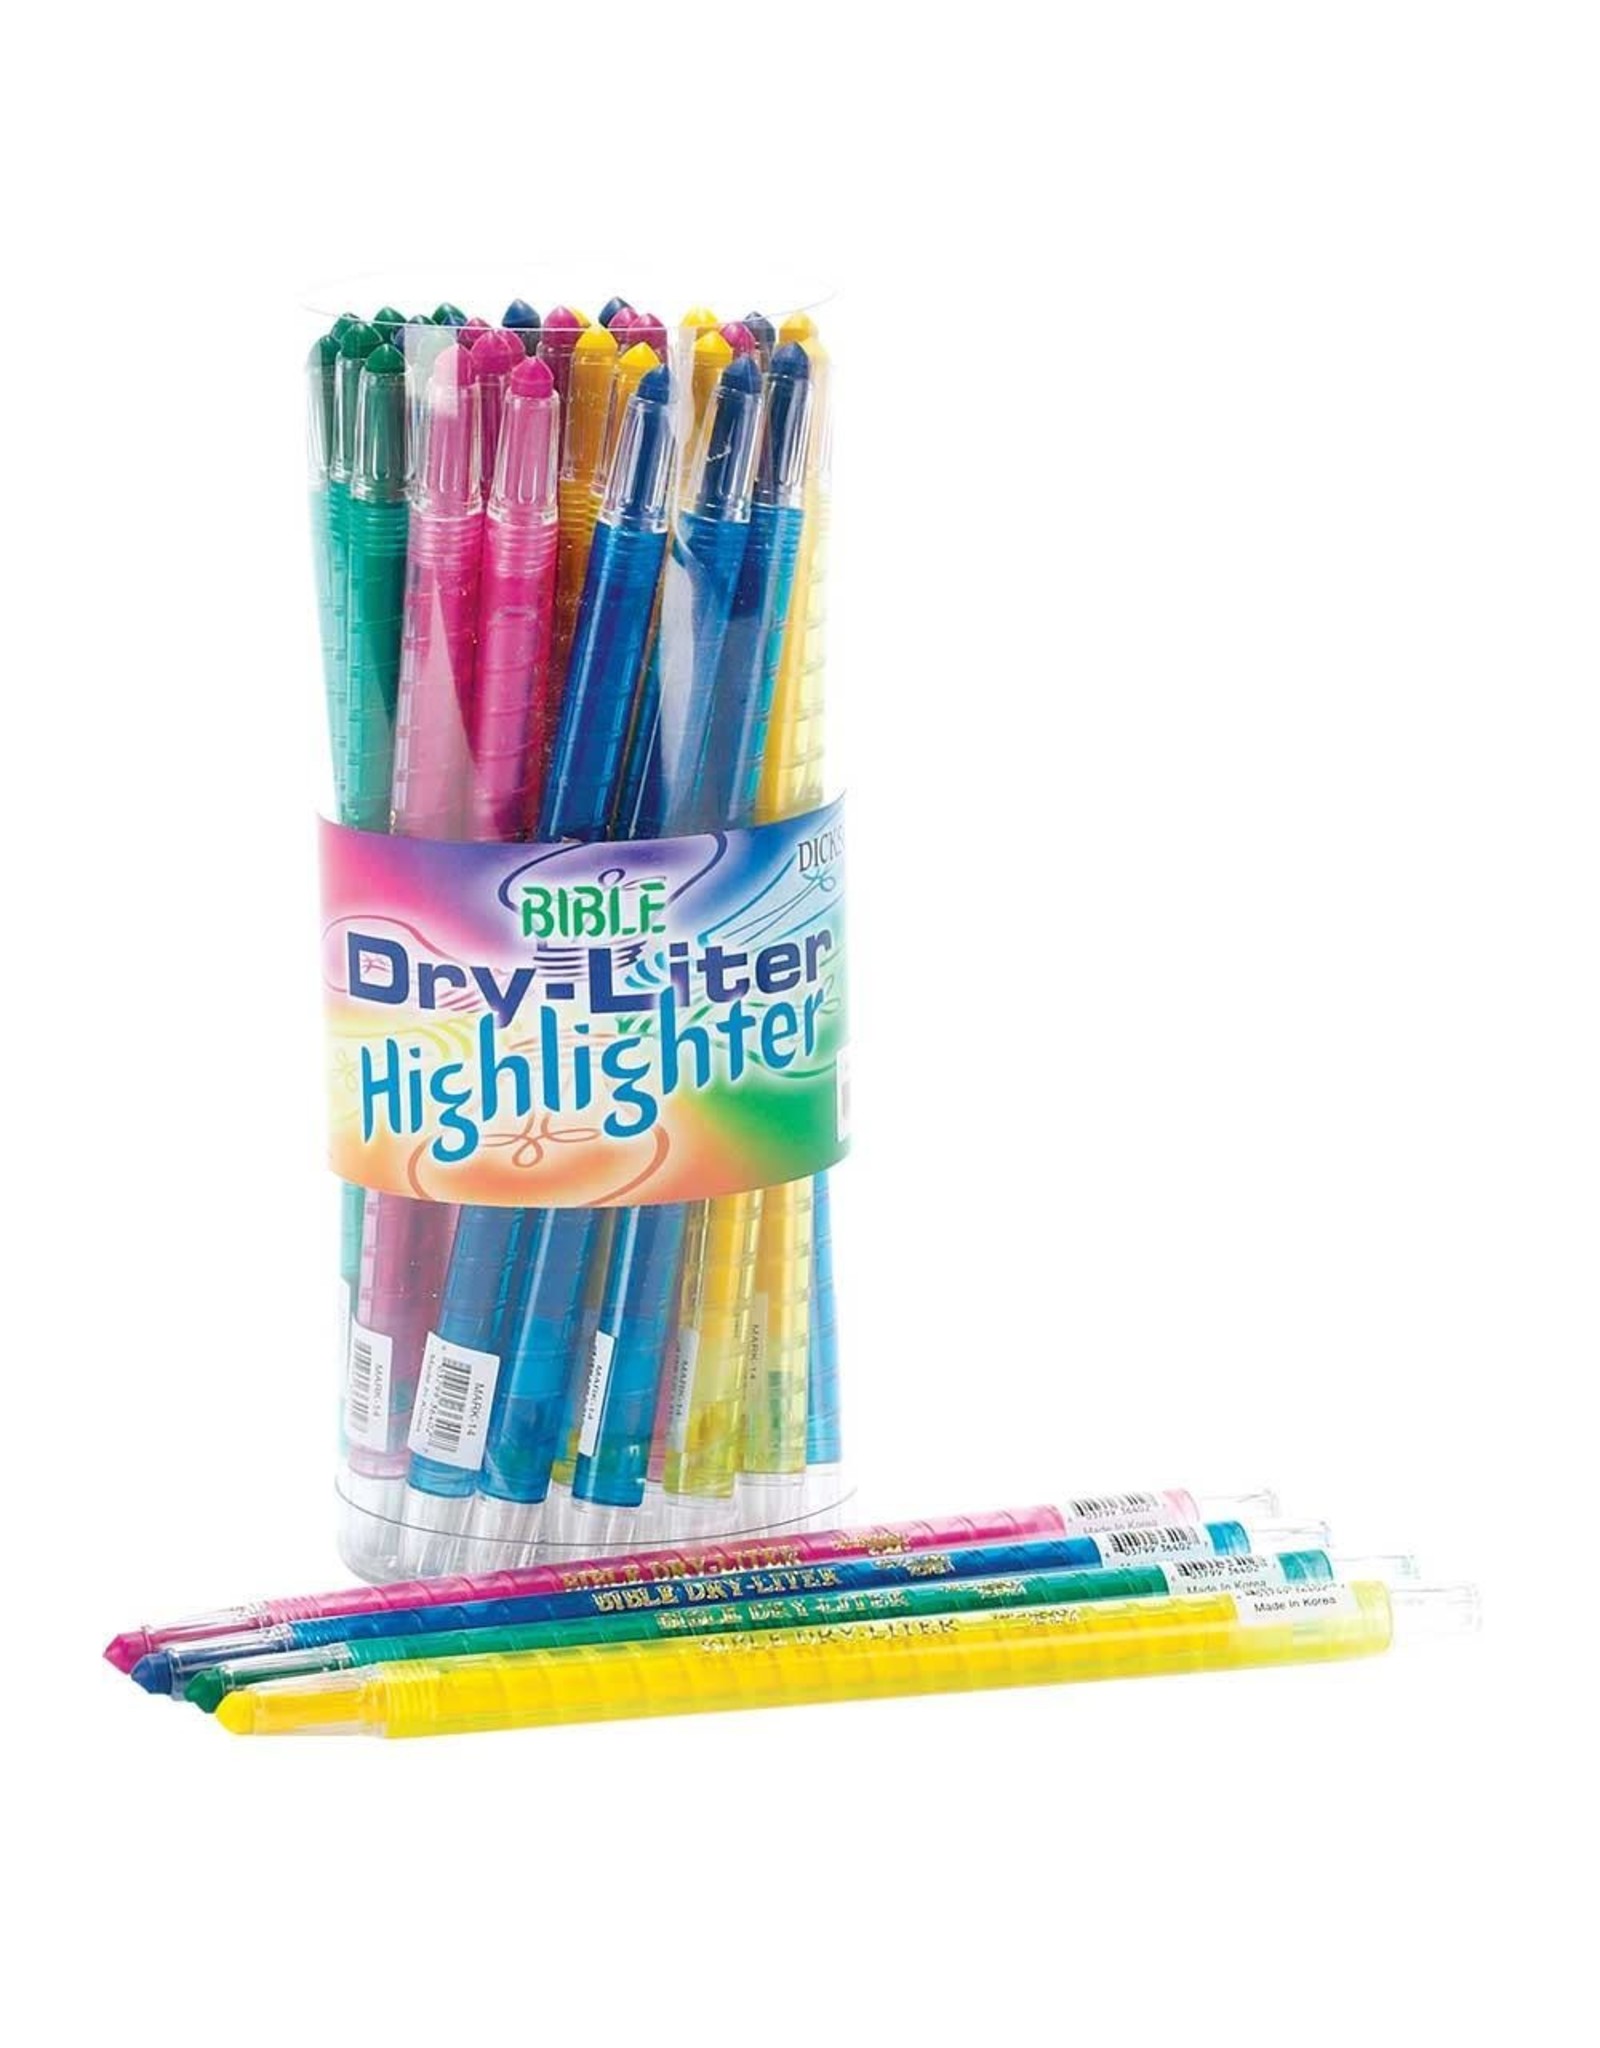 Dicksons Bible Dry-Liter Highlighter Assorted Colors (each)